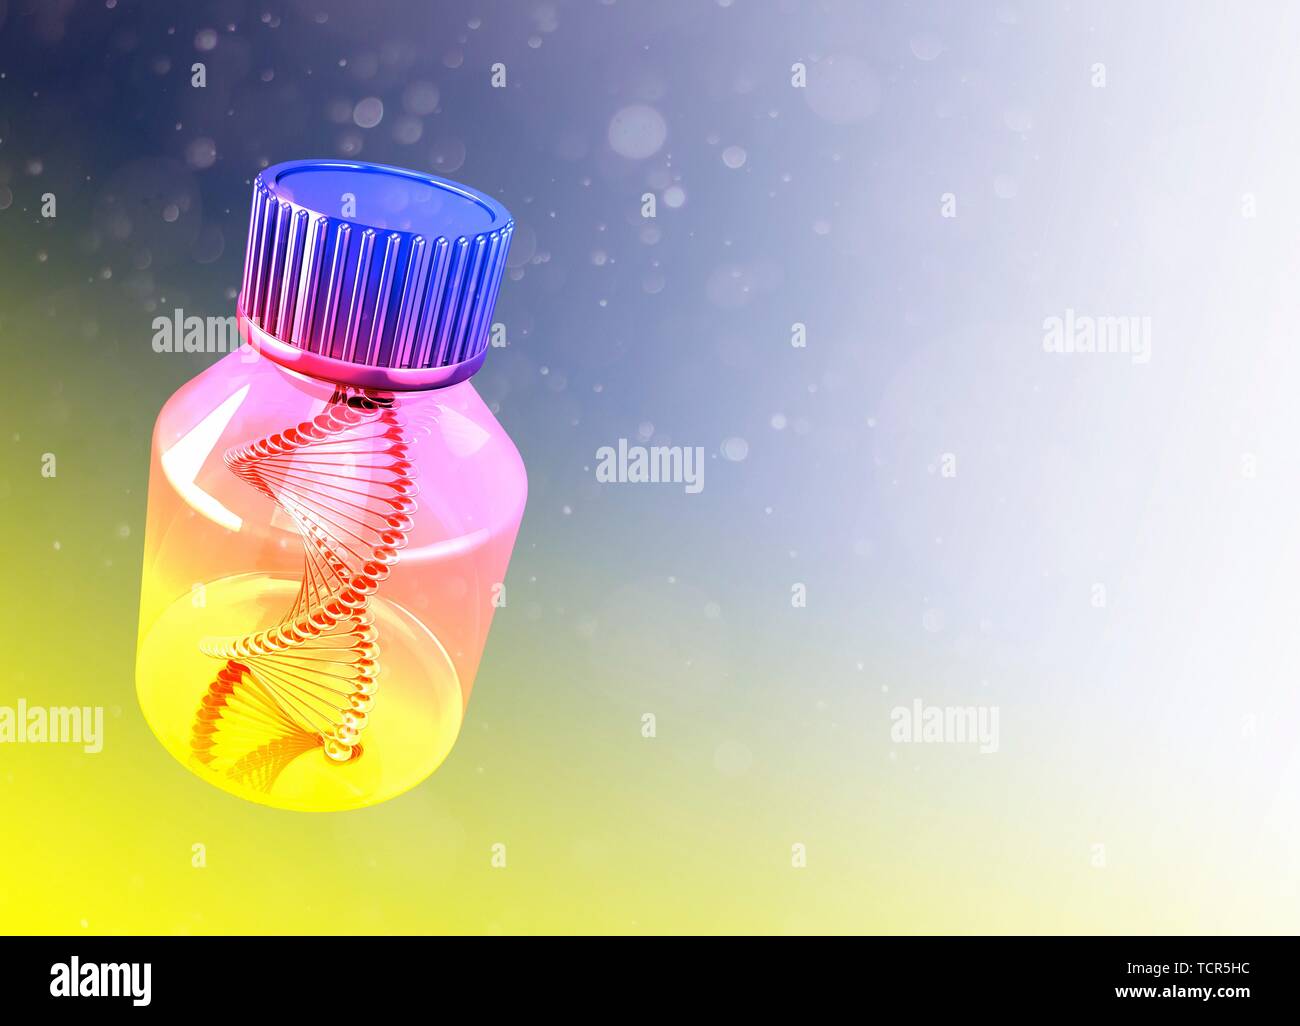 Dna in container, illustration Stock Photo